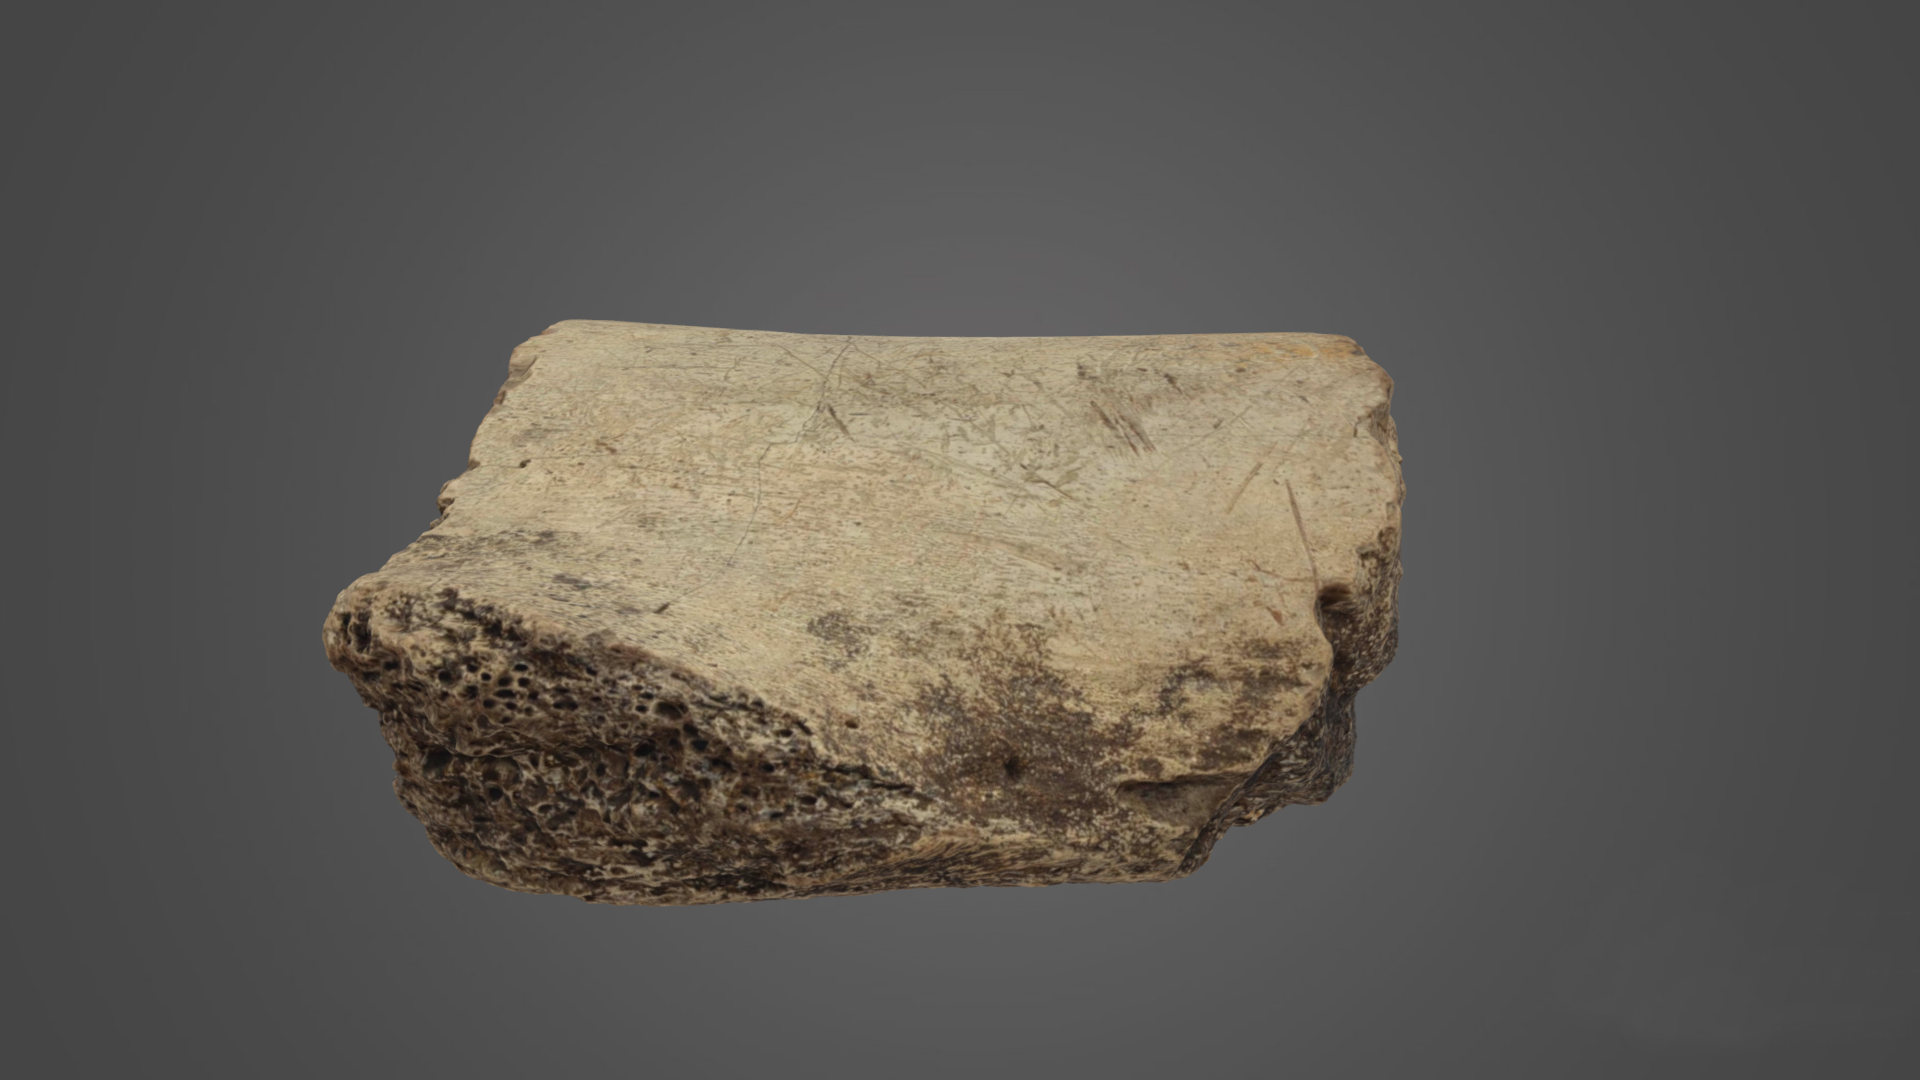 3D Scan of a Petrified Fossil